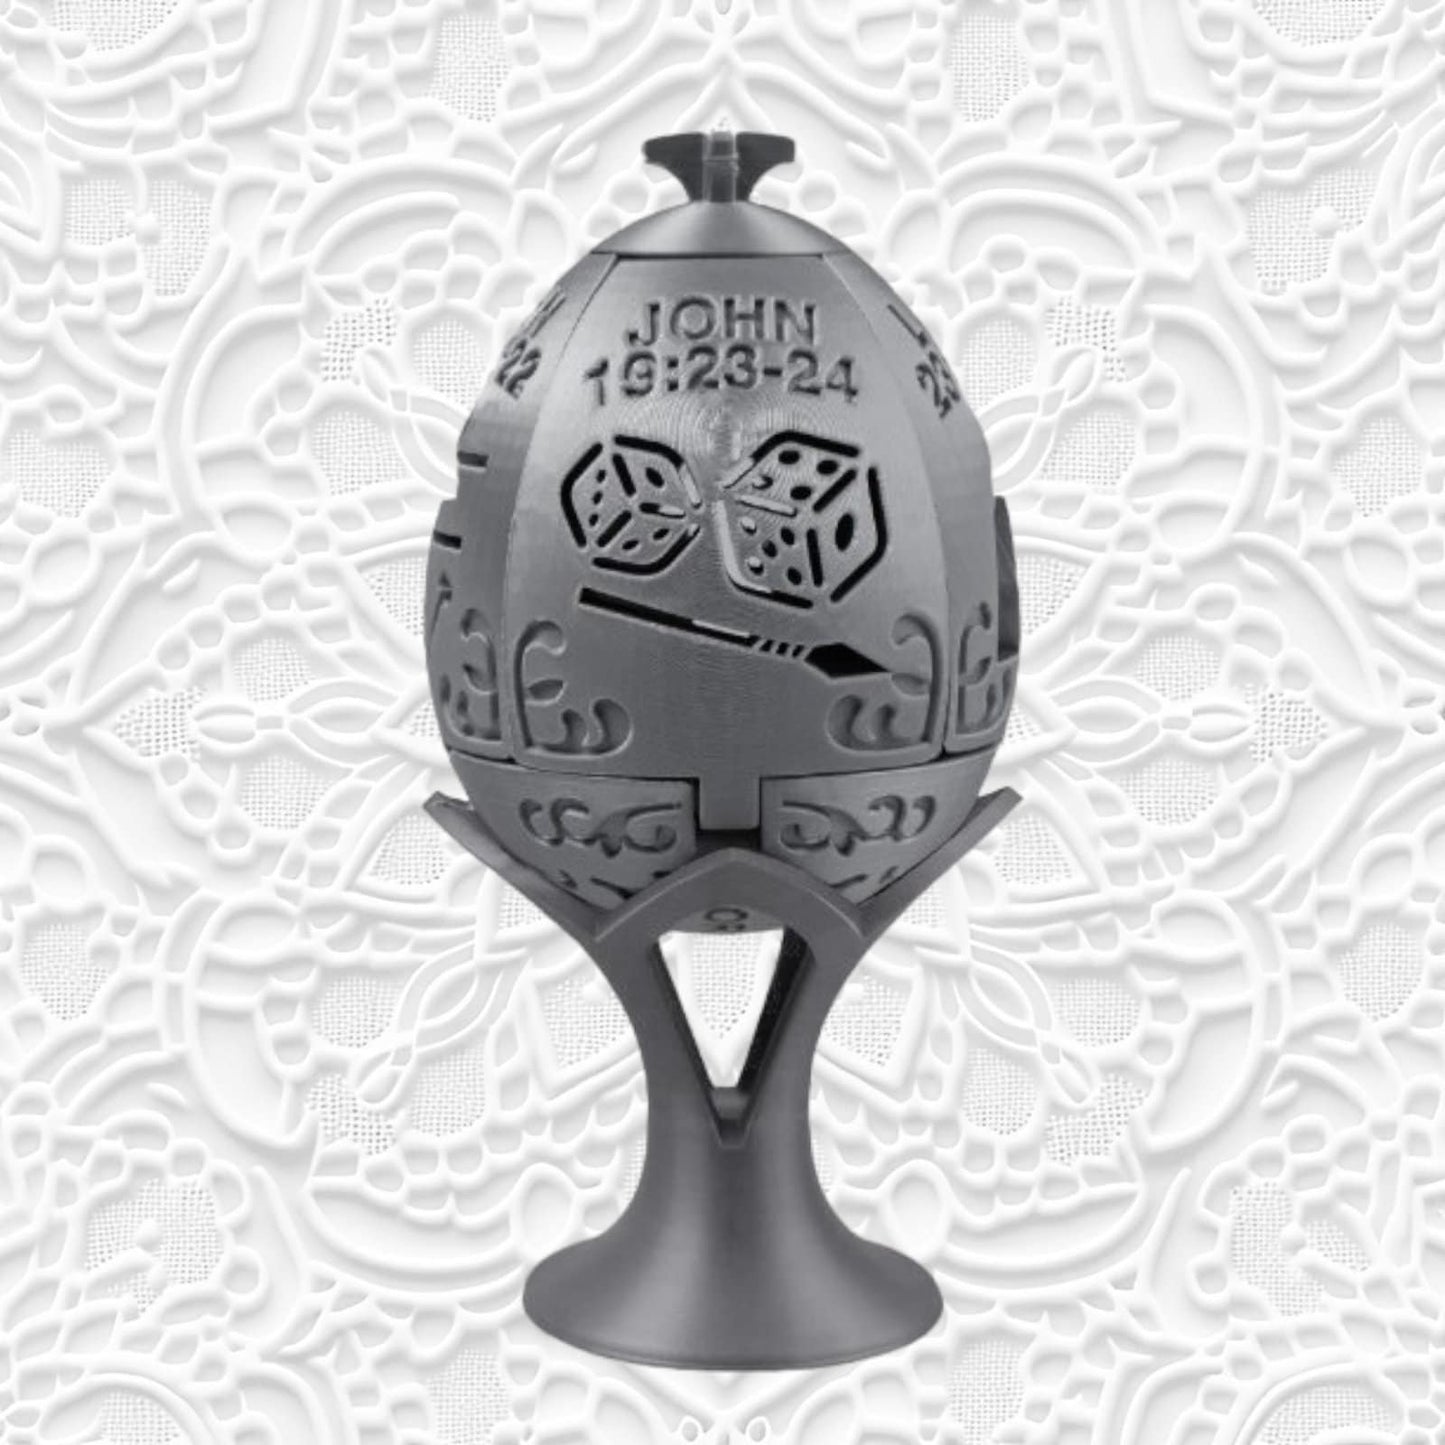 Easter 3D Printed Resurrection Egg - Depicting Jesus's Death & Resurrection with cutouts and Bible verses - 3D Printed Gift